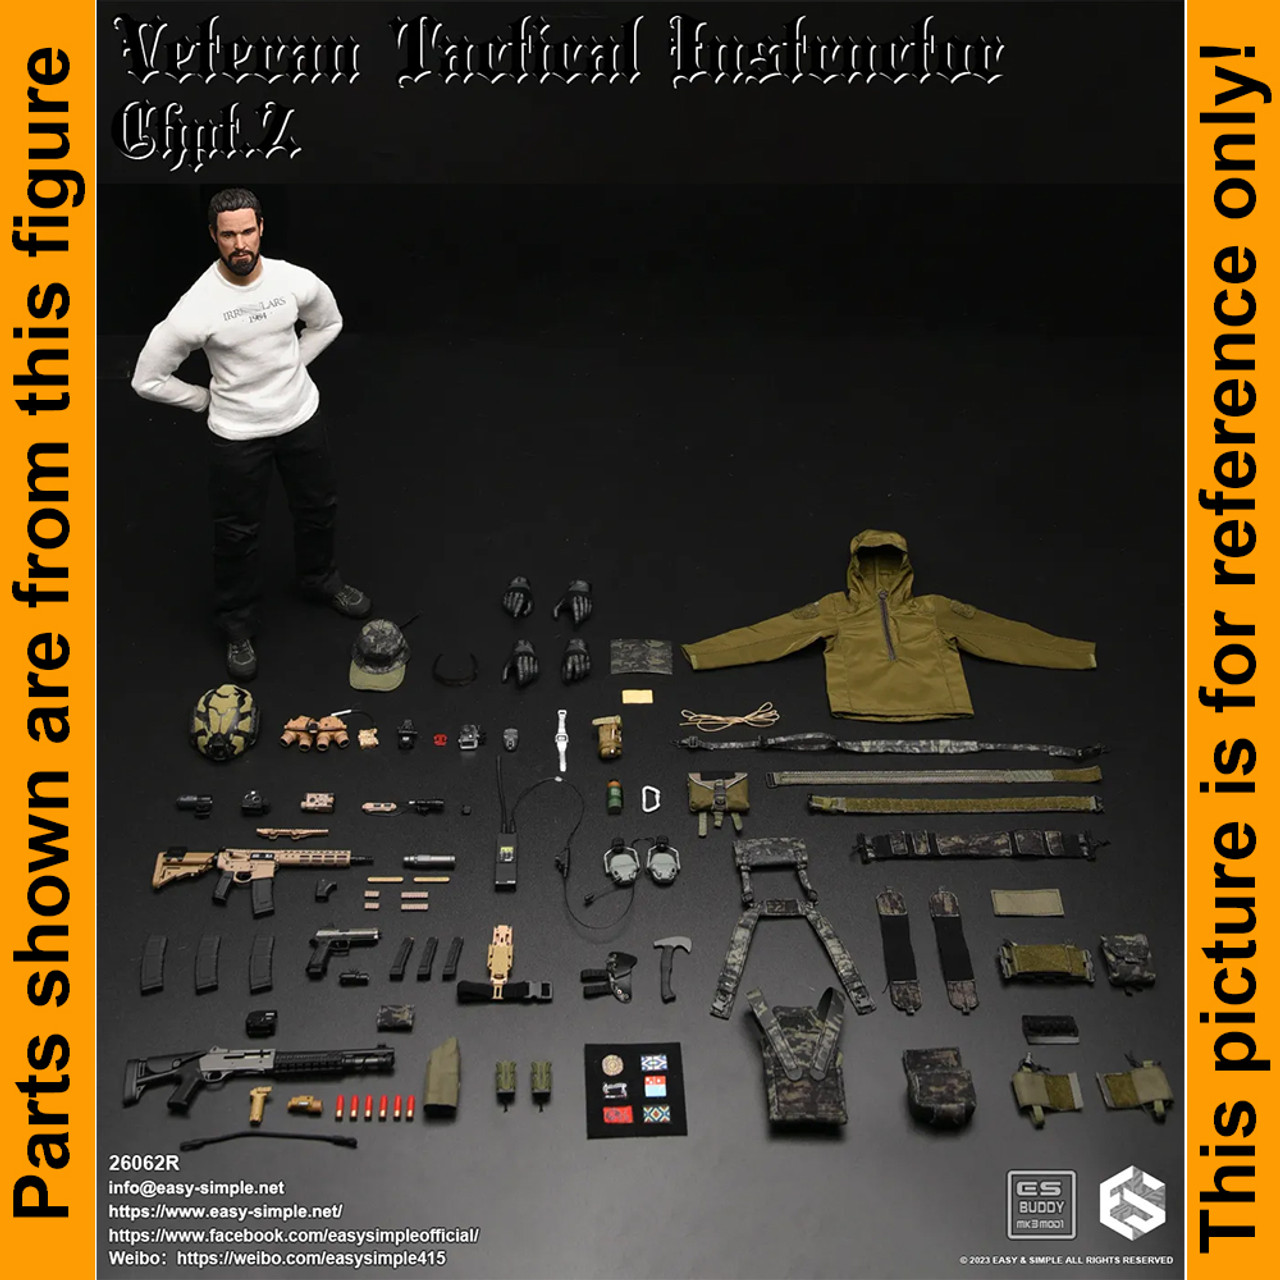 Tactical Instructor Chpt 2 - Wrist Watch - 1/6 Scale -